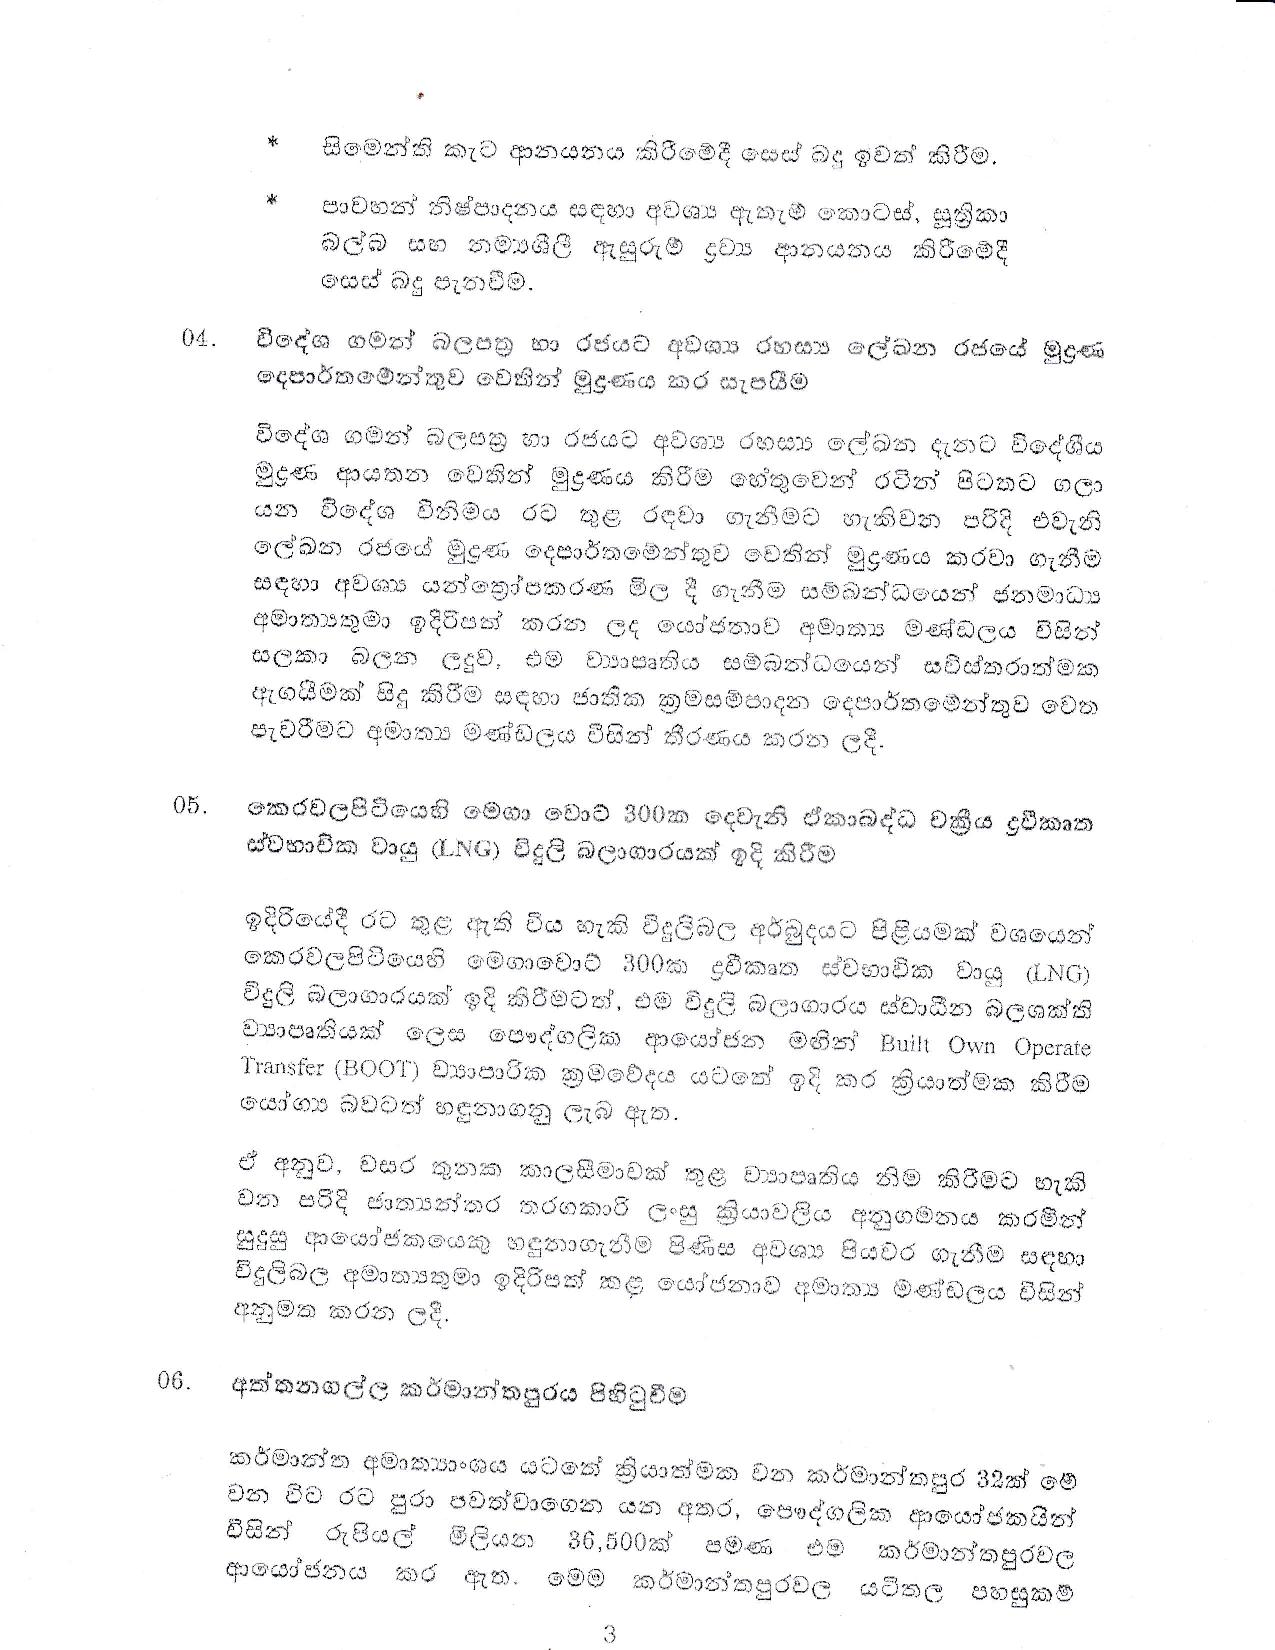 Cabinet Decision on 16.09.2020 page 003